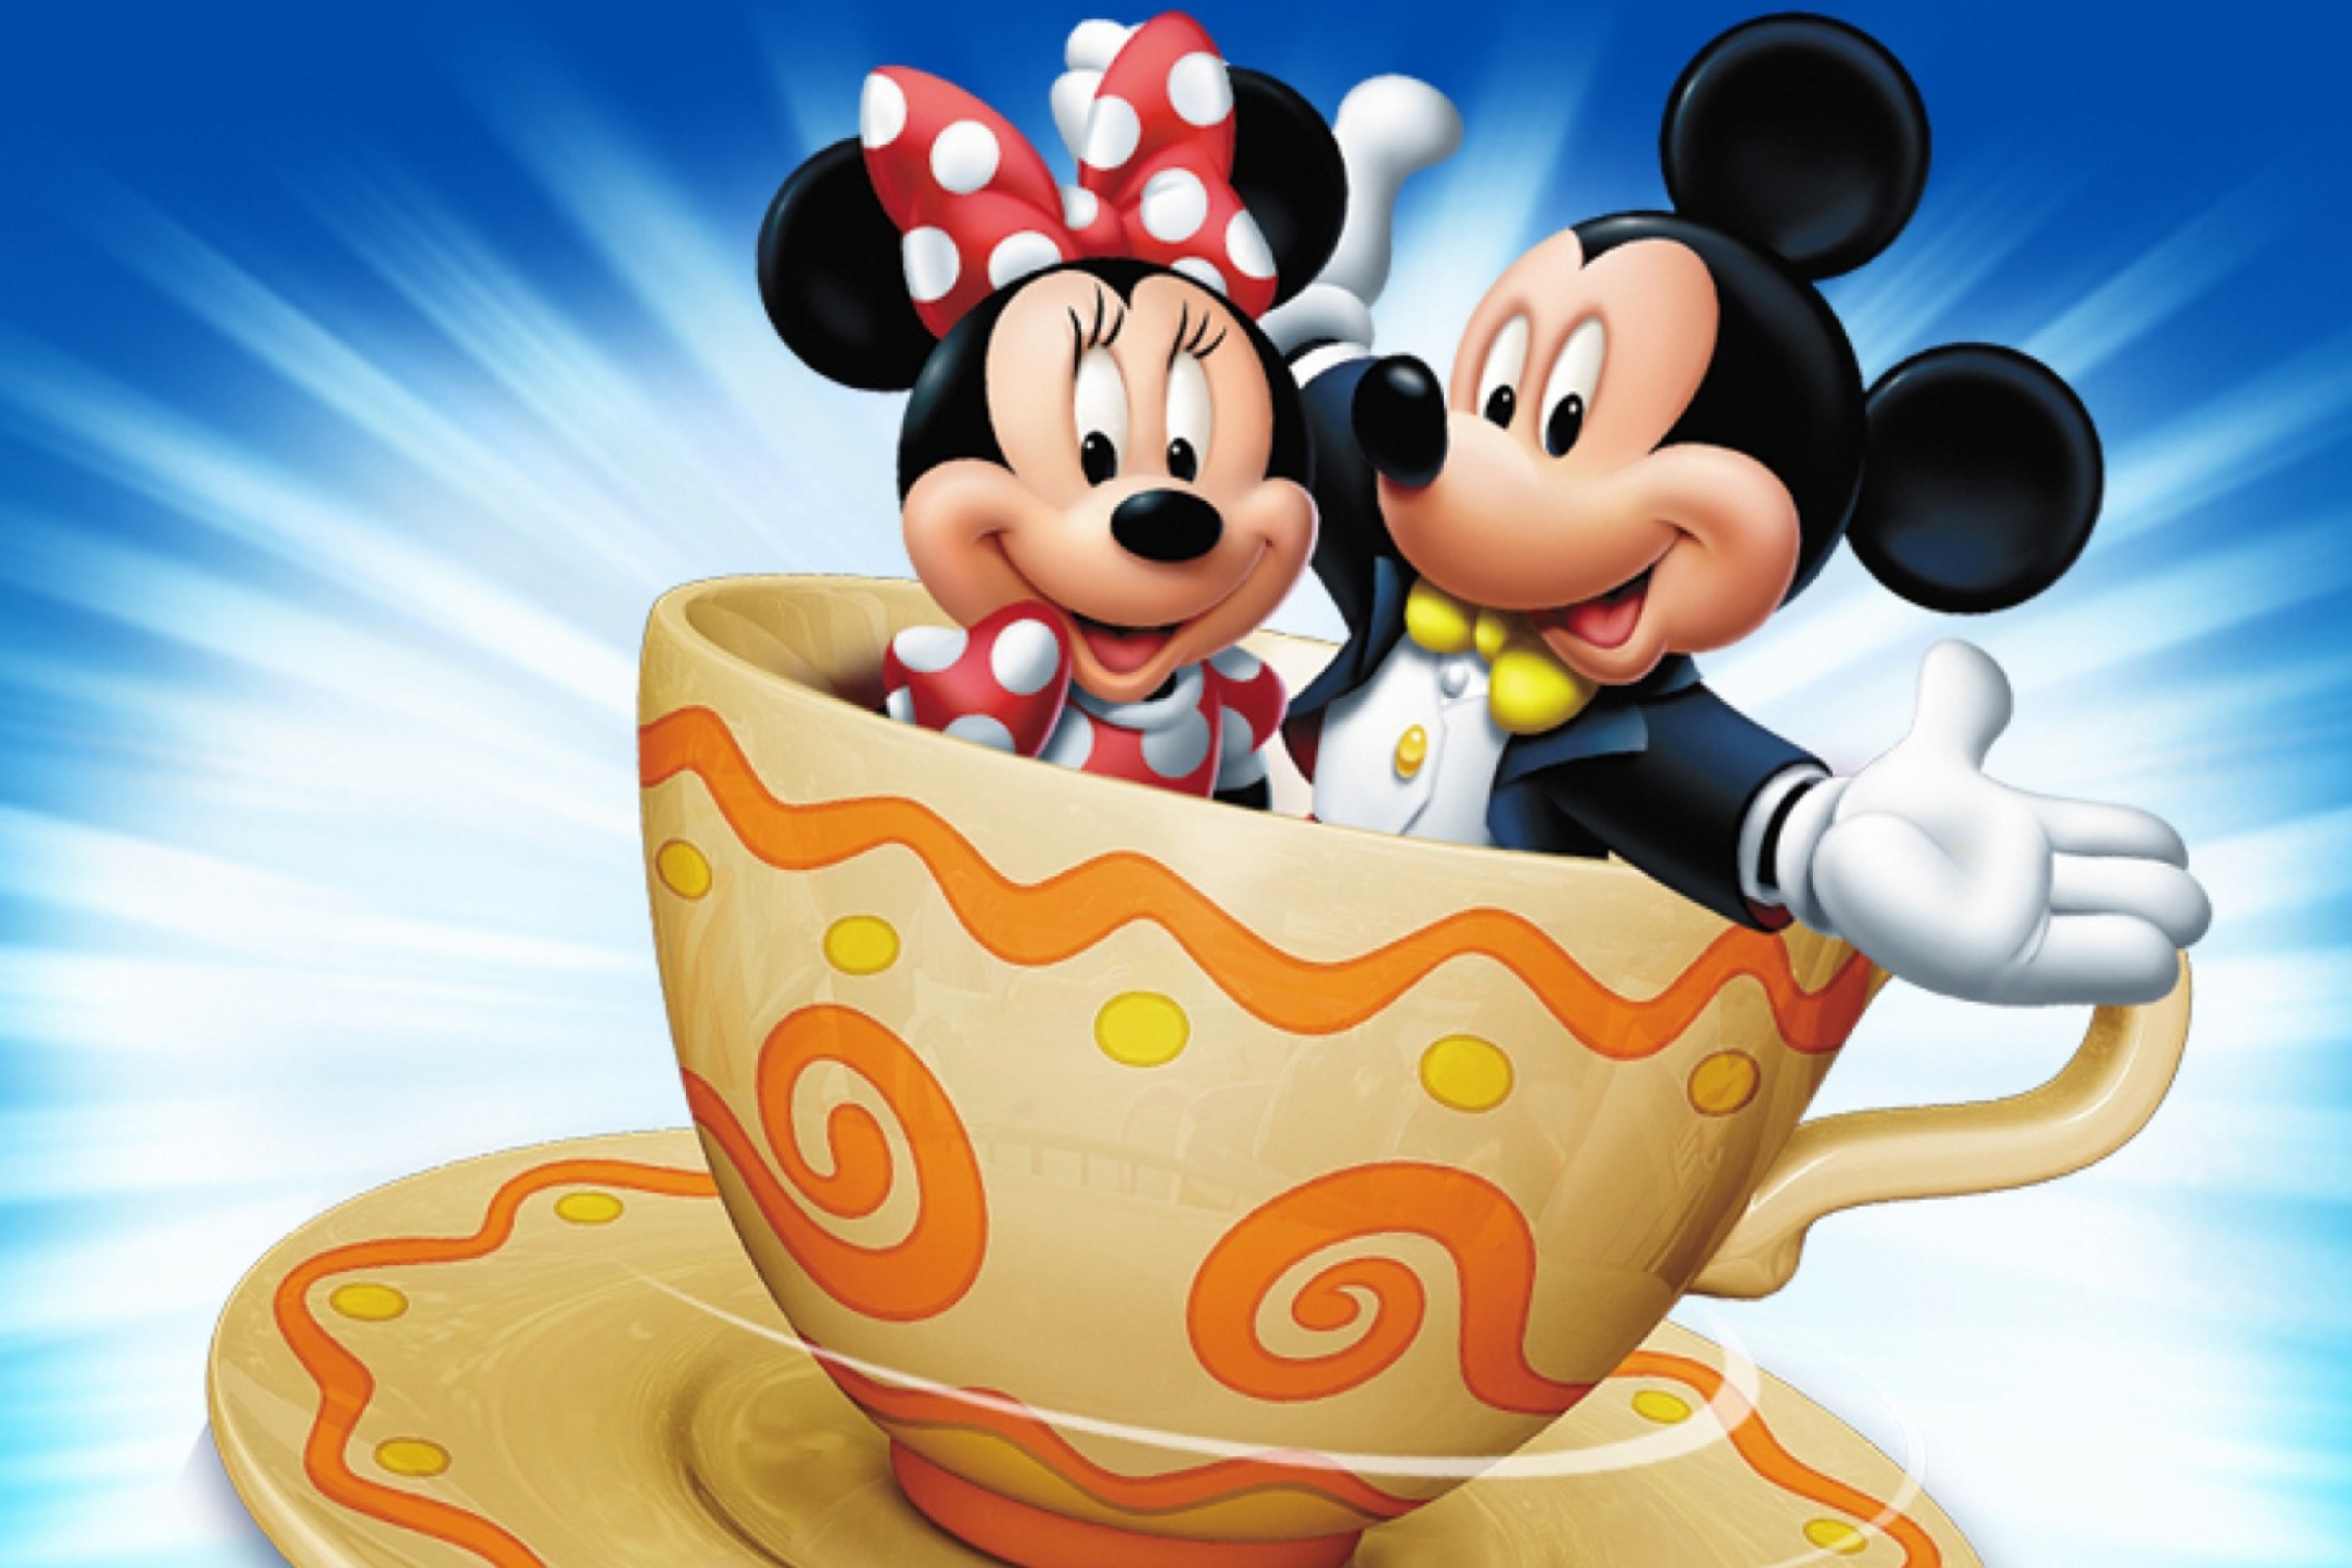 Mickey And Minnie Mouse In Cup wallpaper 2880x1920